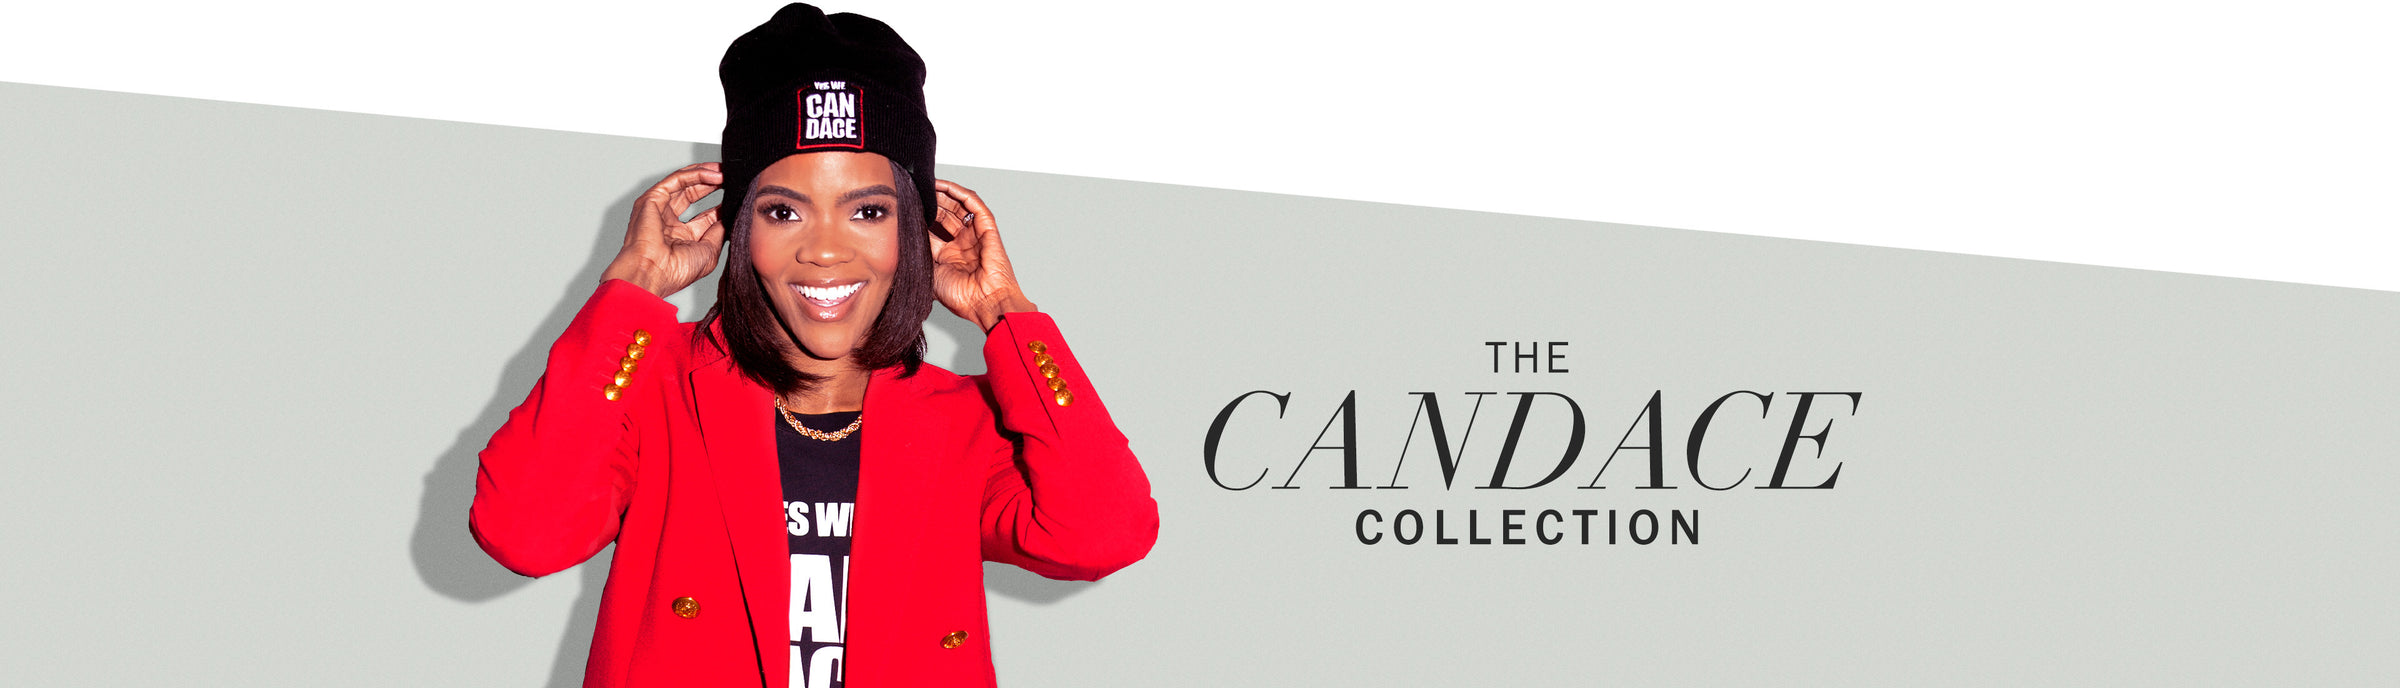 The Candace Owens Collection